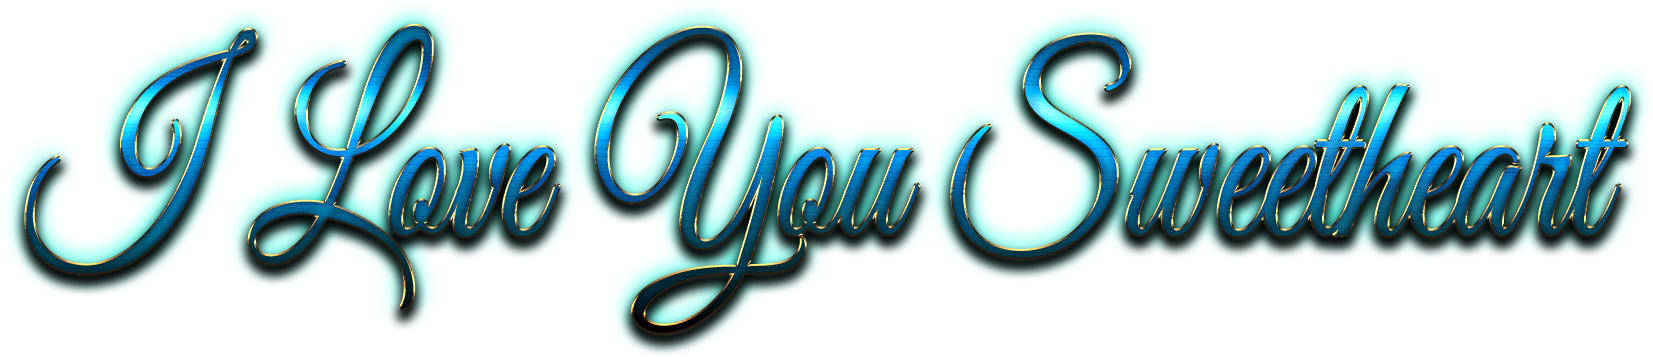 I Love You Sweetheart Graphic Text PNG